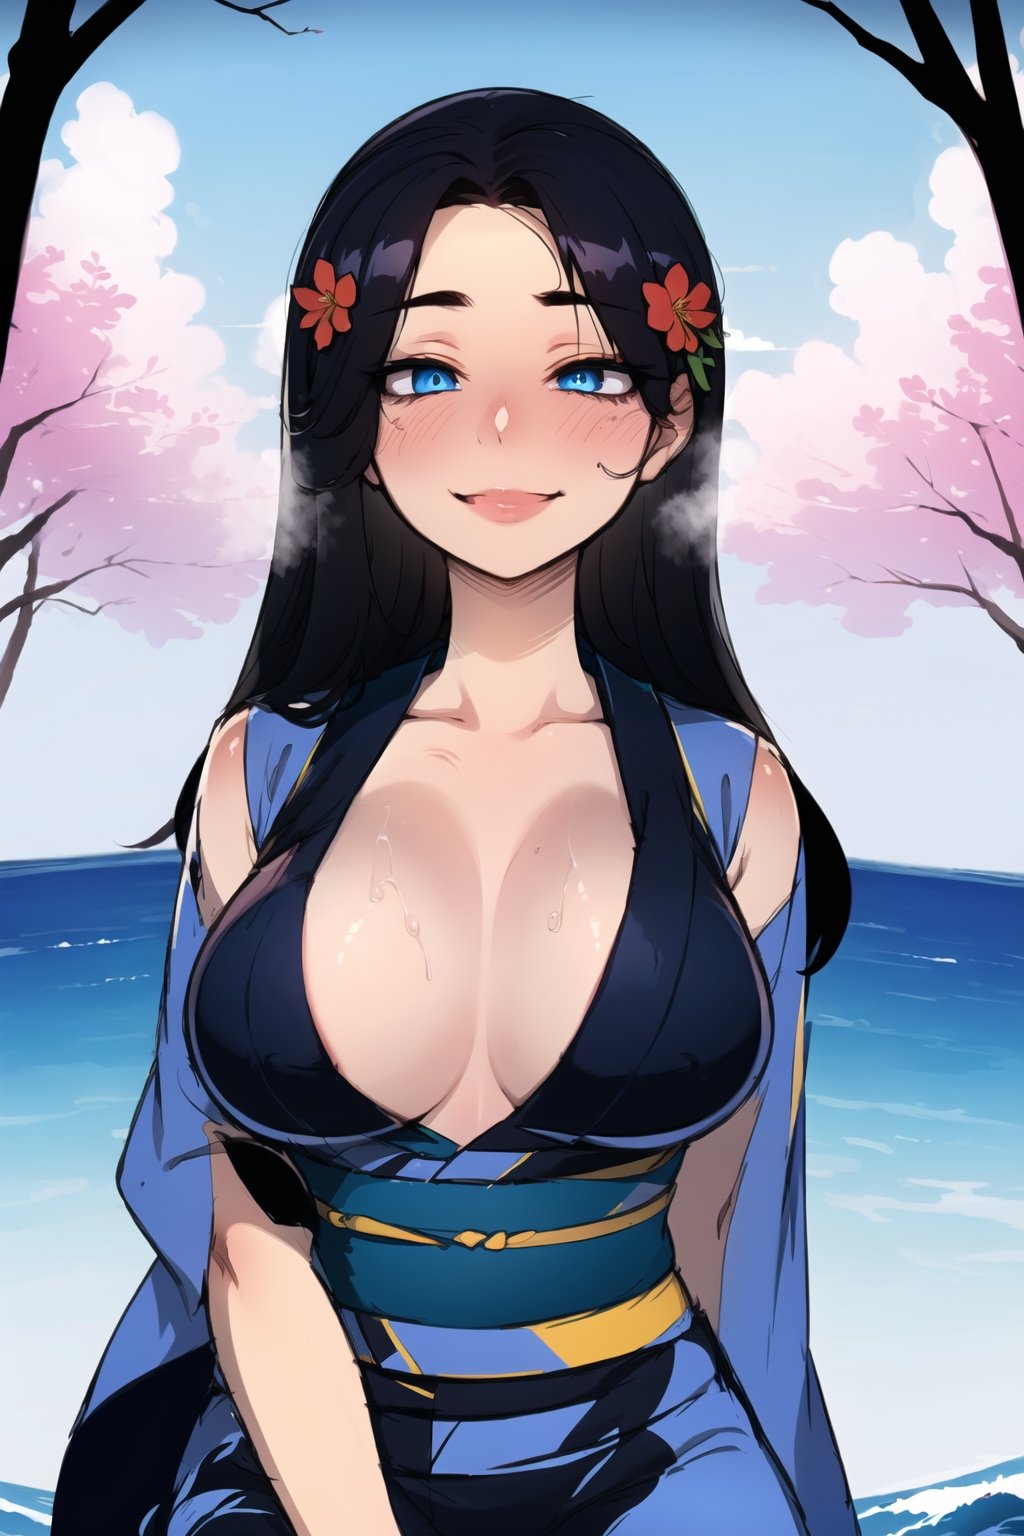 1girl(slim body, adult, 2o years old, long black hair, blue eyes, wearing yukata big breasts), staring at you seductively with a smile on her face, upper body, background(day, outdoor, sky, sun, ocean, flowers, trees) (masterpiece, highres, high quality:1.2), ambient occlusion, outstanding colors, low saturation,High detailed, Detailedface, Dreamscape,ratatatat74 style